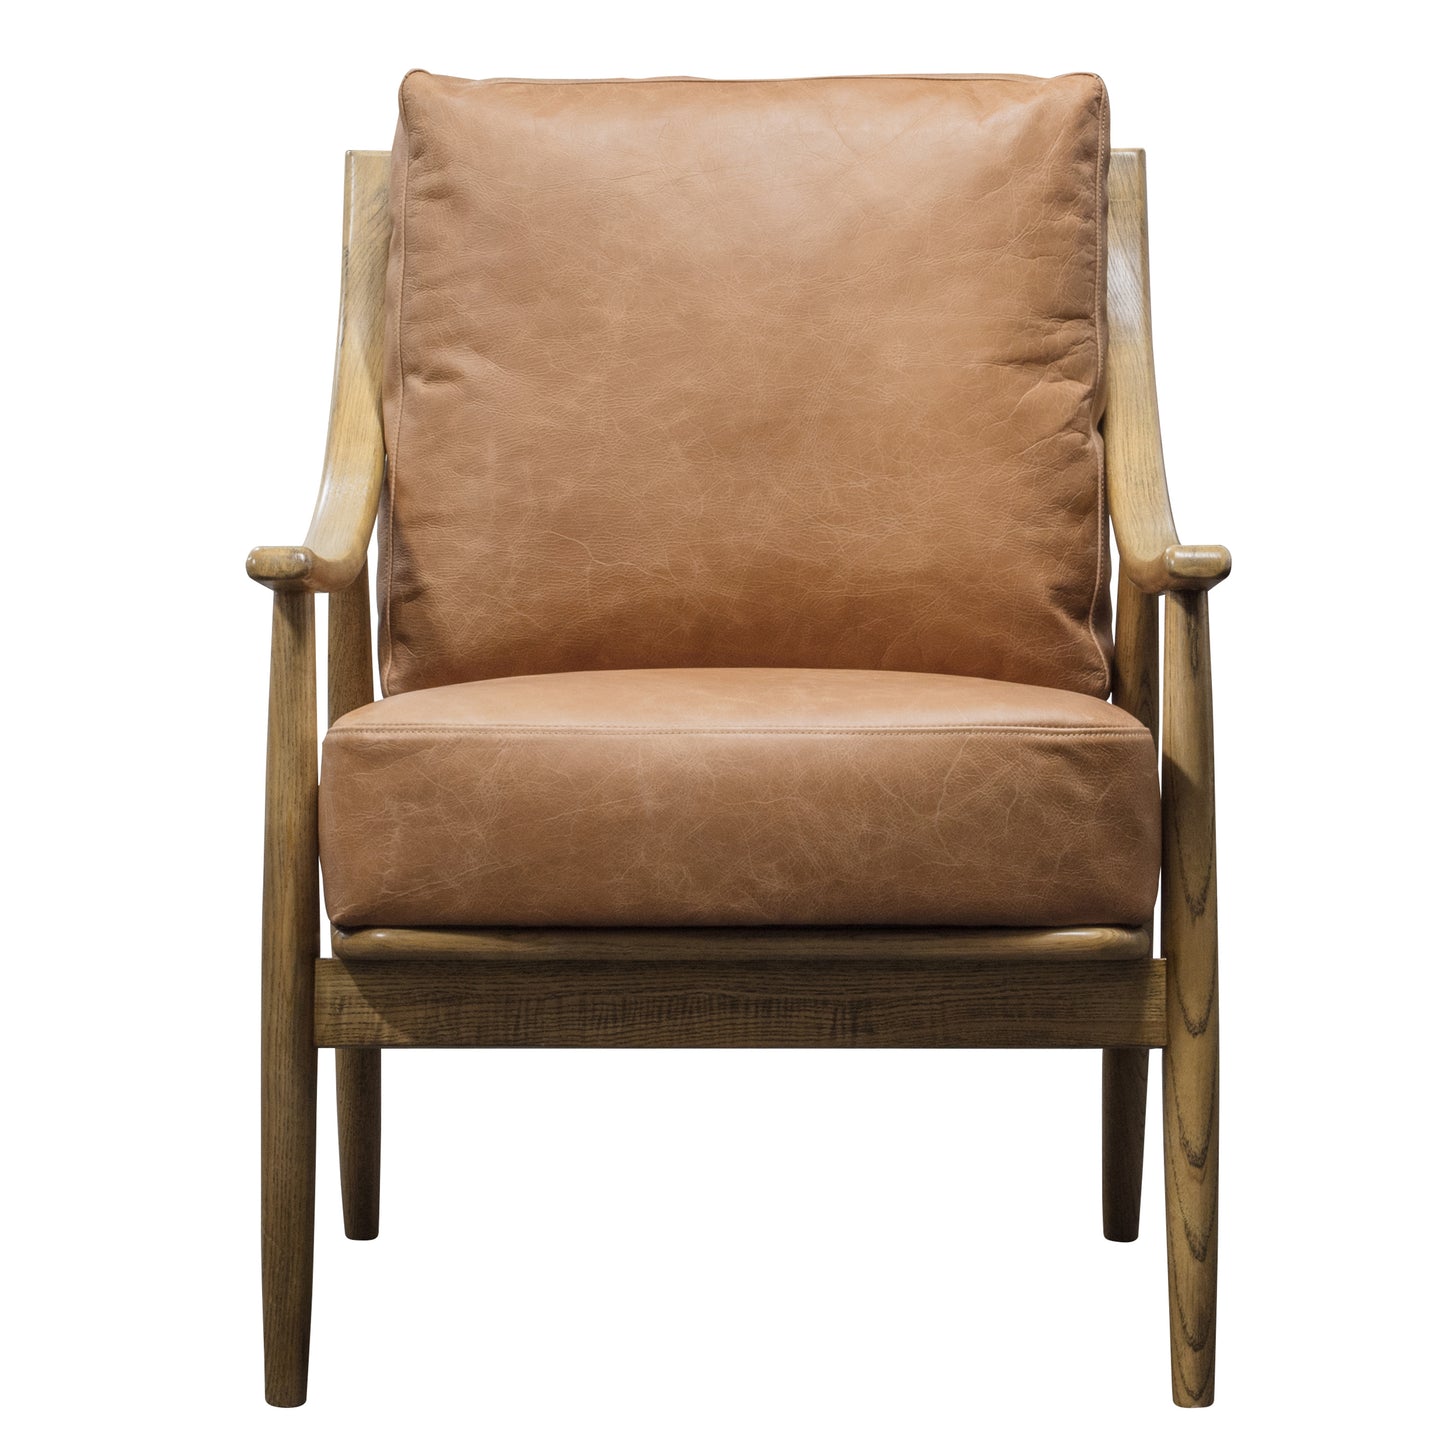 A Reliant Armchair Brown Leather with wooden legs for interior decor.